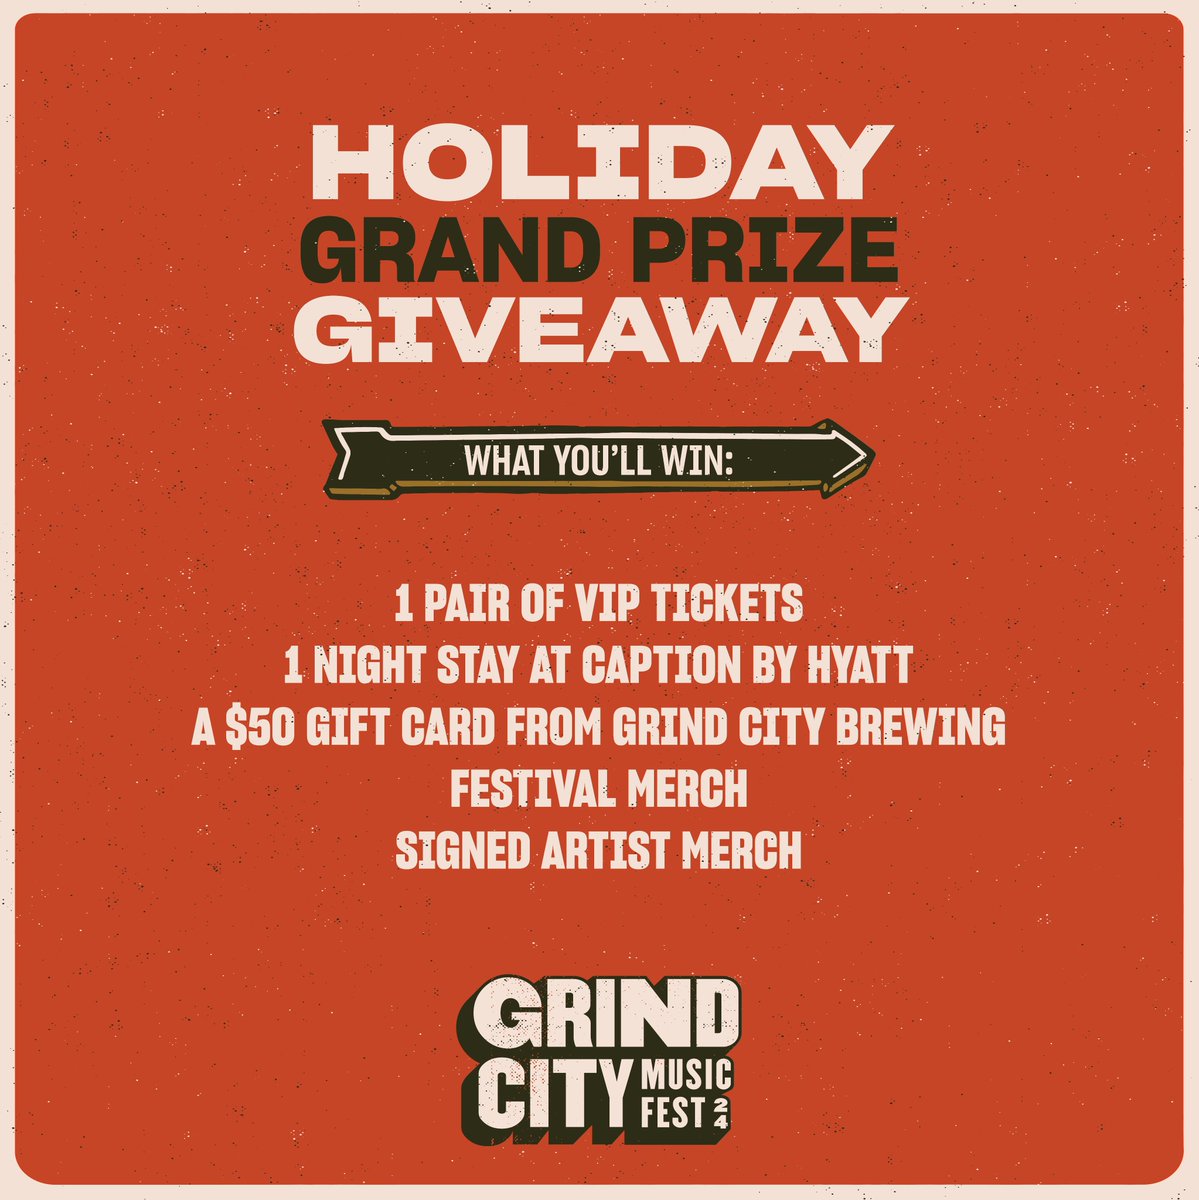 Our Holiday Grand Prize Giveaway has begun! Enter for a chance to win: 🤘2 VIP tickets to Grind City Music Festival 🤘One-night hotel stay 🤘$50 gift card to Grind City Brewing 🤘Festival and Grind City Brewing merch Enter here - sweepwidget.com/c/75219-ri0yw9… **Must be 21 to enter